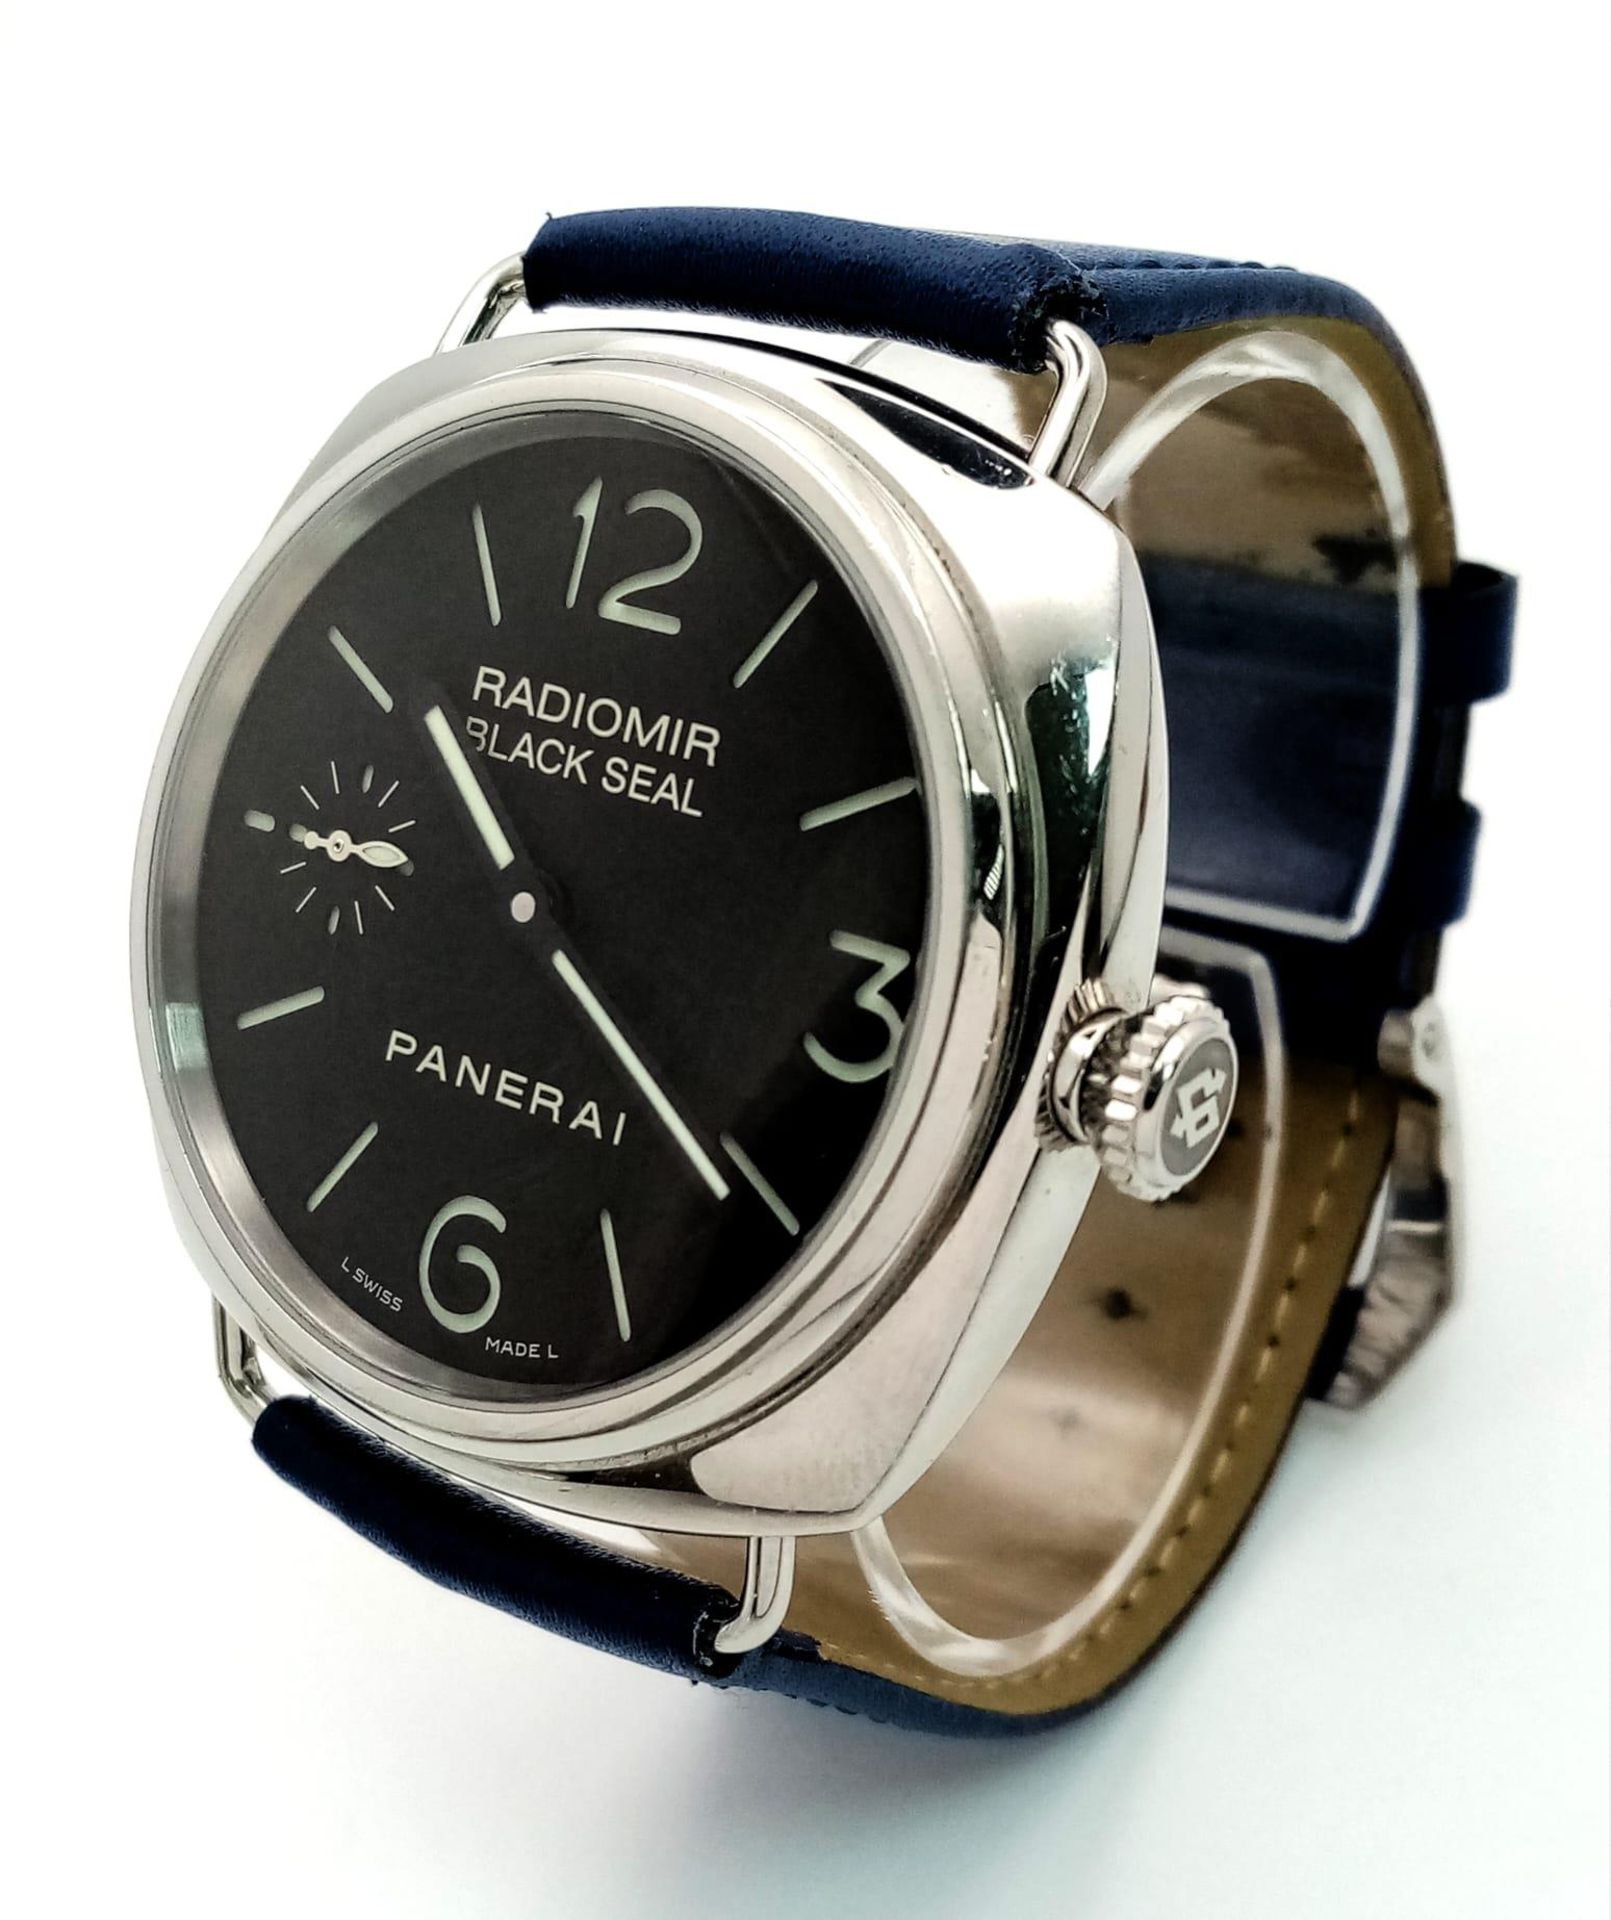 A Panerai Radiomir Black Seal Gents Watch. Blue leather strap. Stainless steel case - 46mm. Black